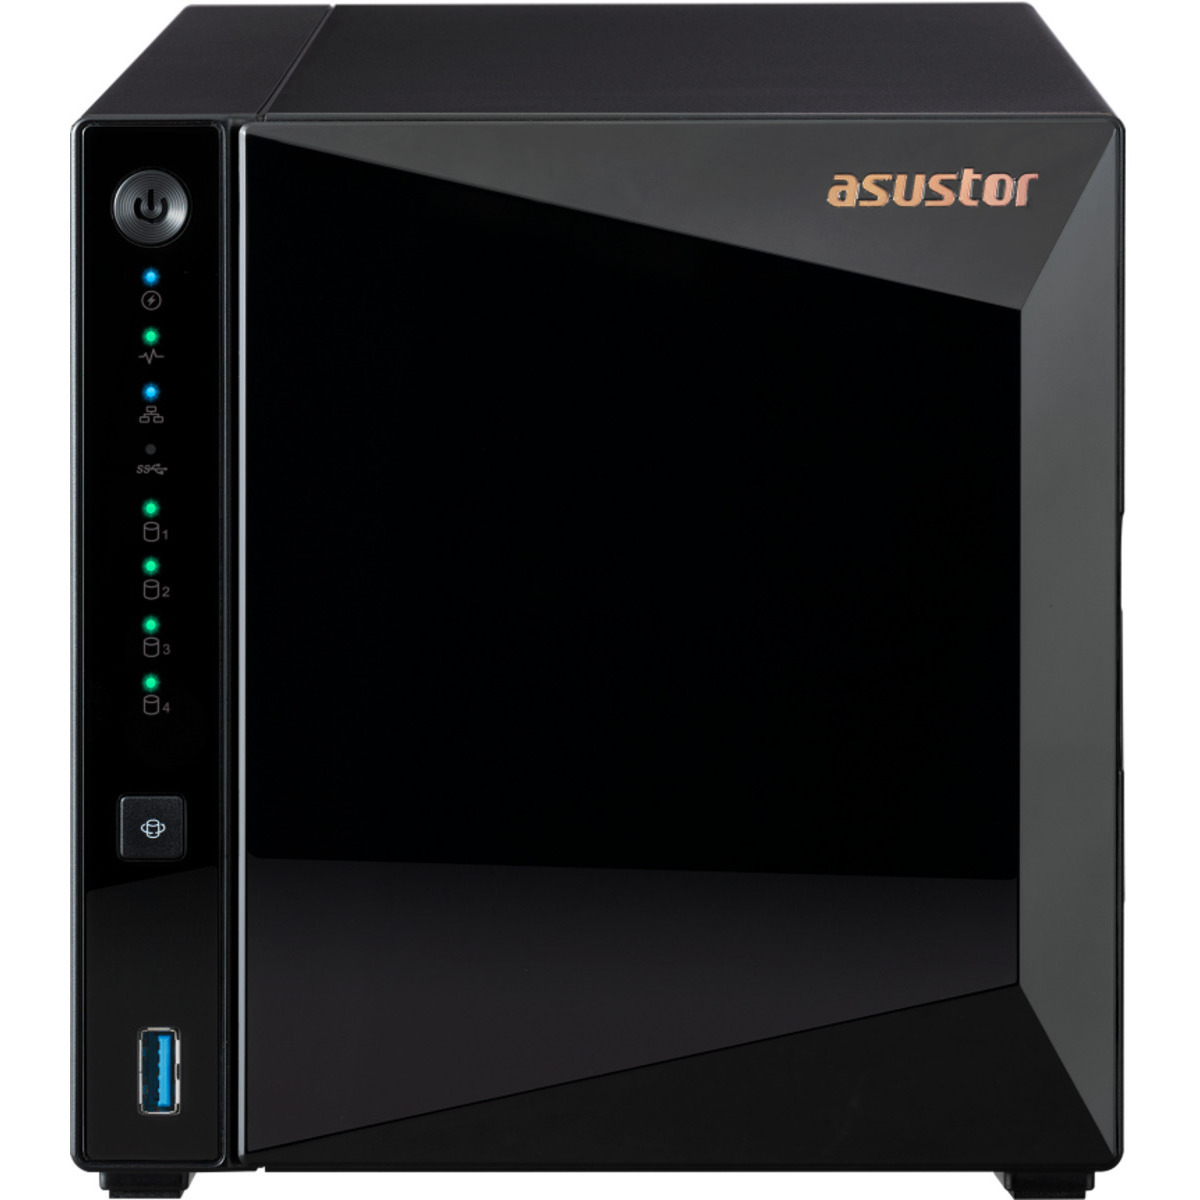 ASUSTOR DRIVESTOR 4 Pro Gen2 AS3304T v2 64tb 4-Bay Desktop Personal / Basic Home / Small Office NAS - Network Attached Storage Device 4x16tb Seagate IronWolf Pro ST16000NT001 3.5 7200rpm SATA 6Gb/s HDD NAS Class Drives Installed - Burn-In Tested - ON SALE DRIVESTOR 4 Pro Gen2 AS3304T v2